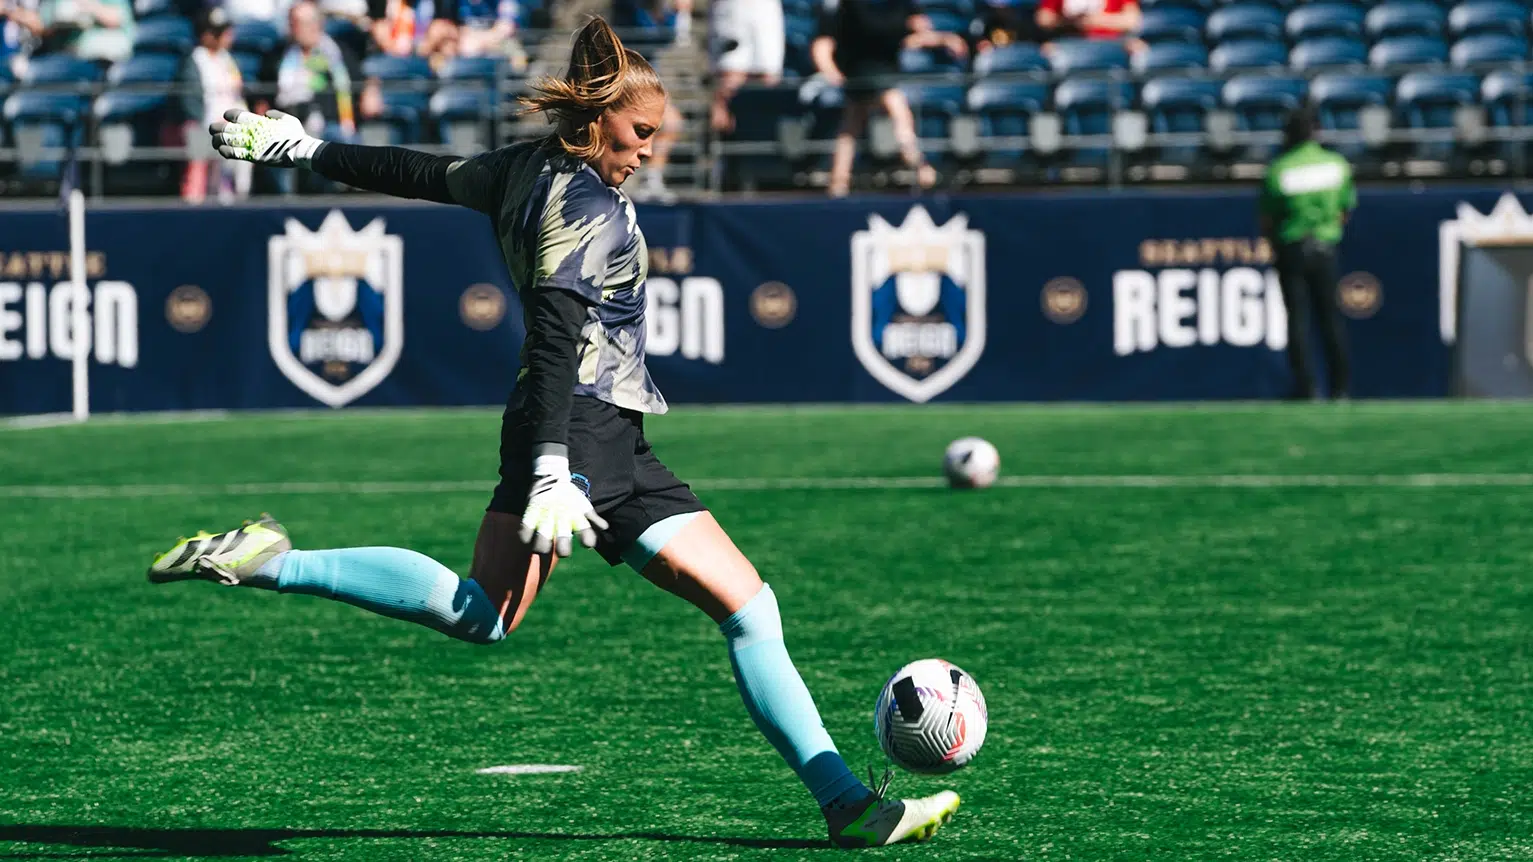 NWSL Independent Review Panel Issues Decision on Kingsbury Red Card Featured Image